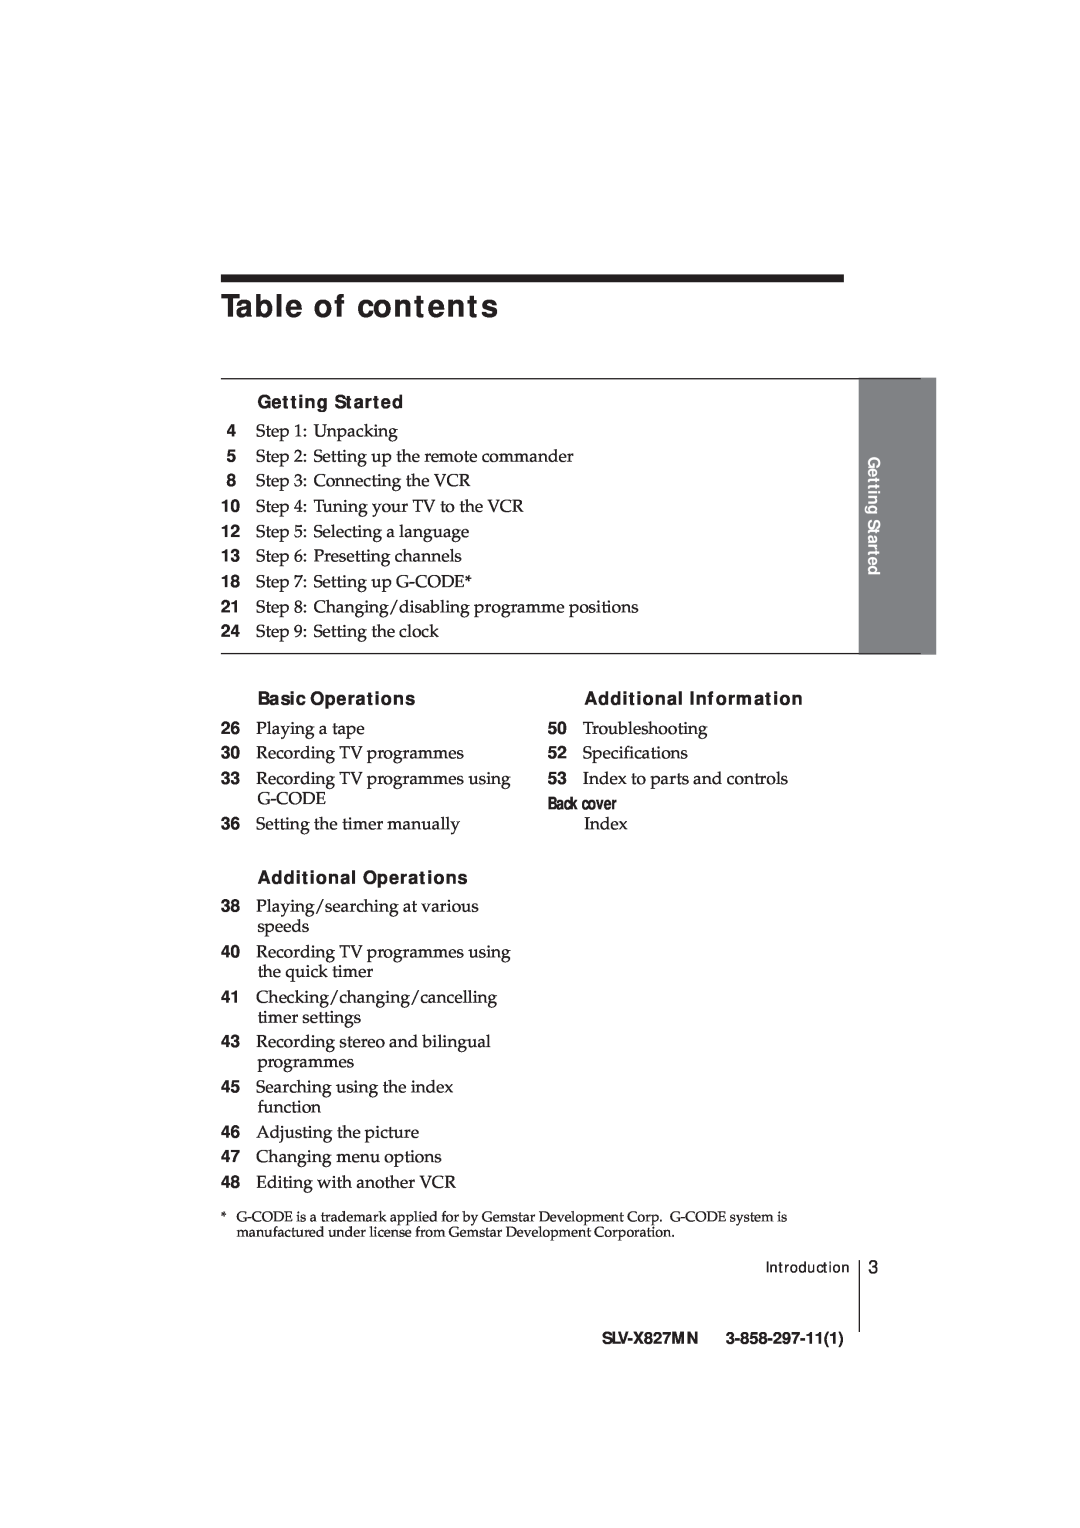 Sony SLV-X827MN manual Table of contents, Getting Started, Basic Operations, Additional Information, Playing a tape, G-Code 